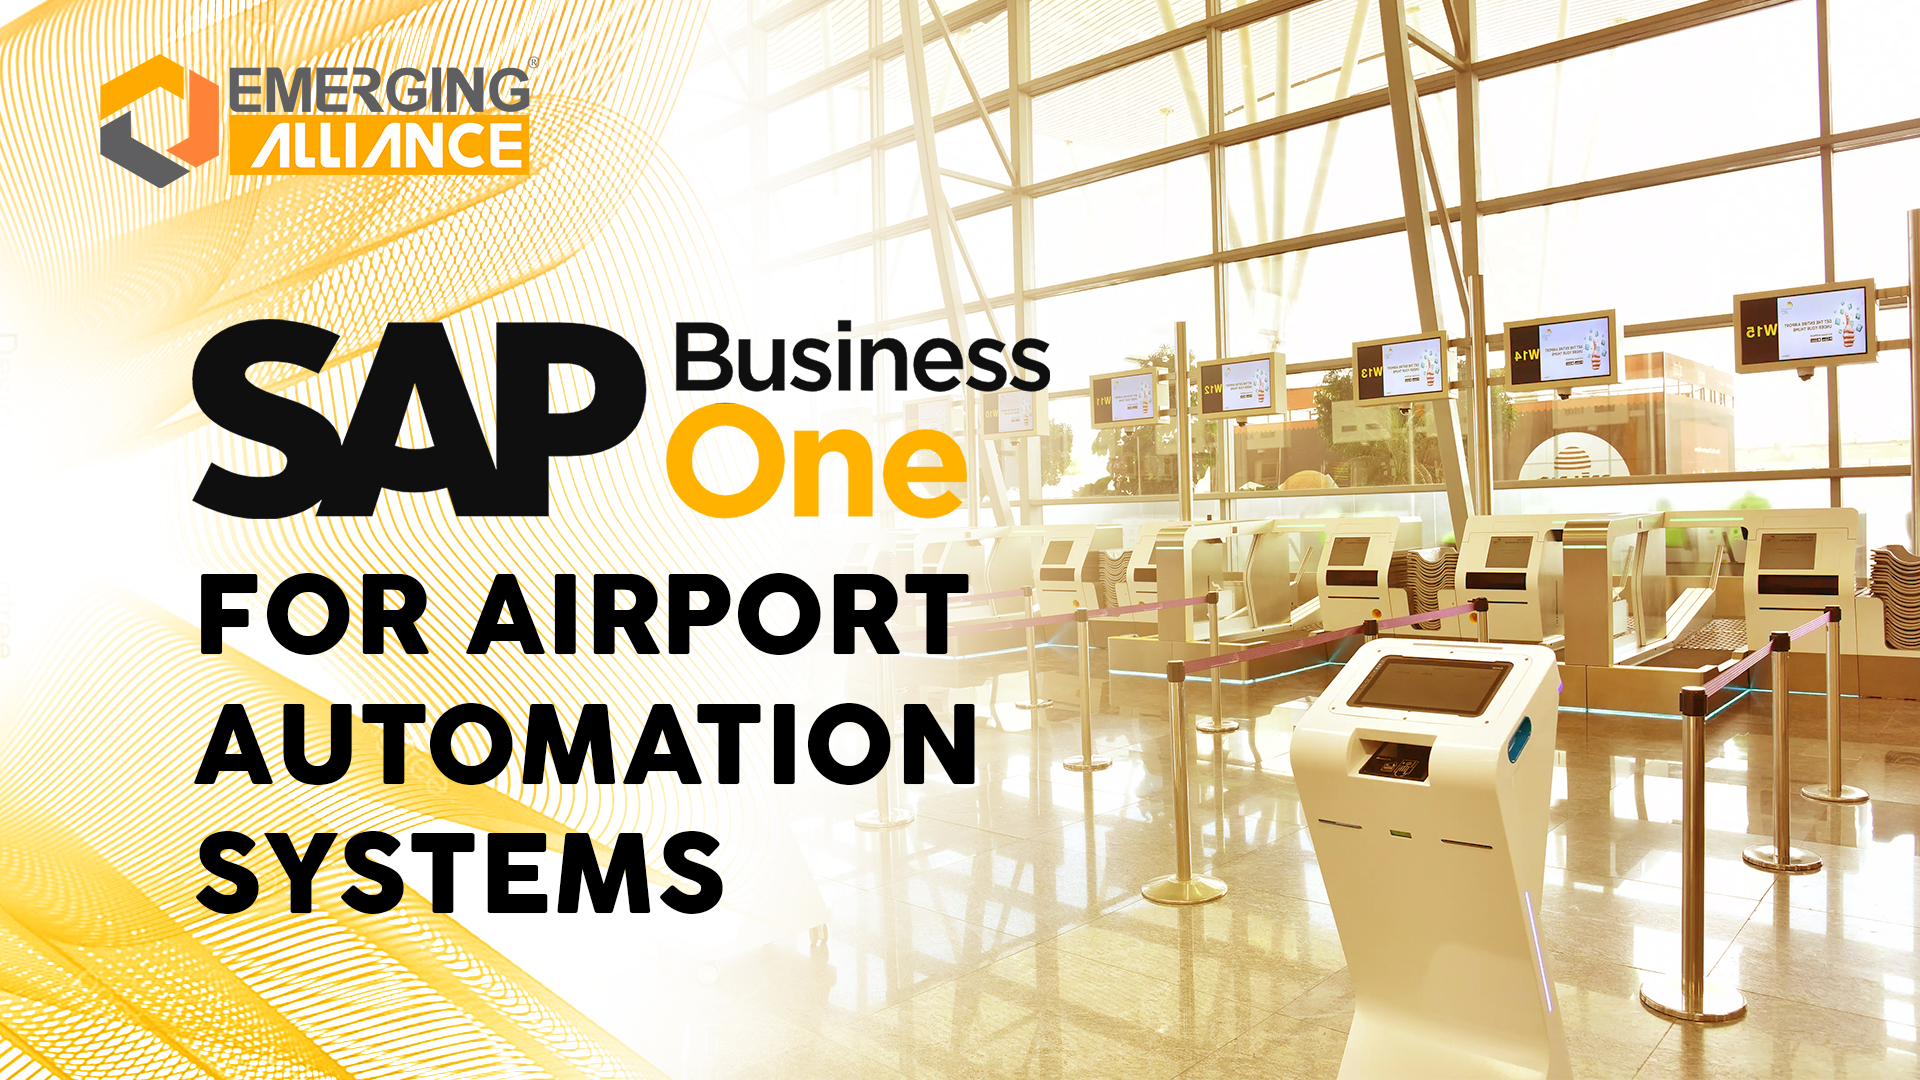 SAP Business One for Aviation and Airport Automation